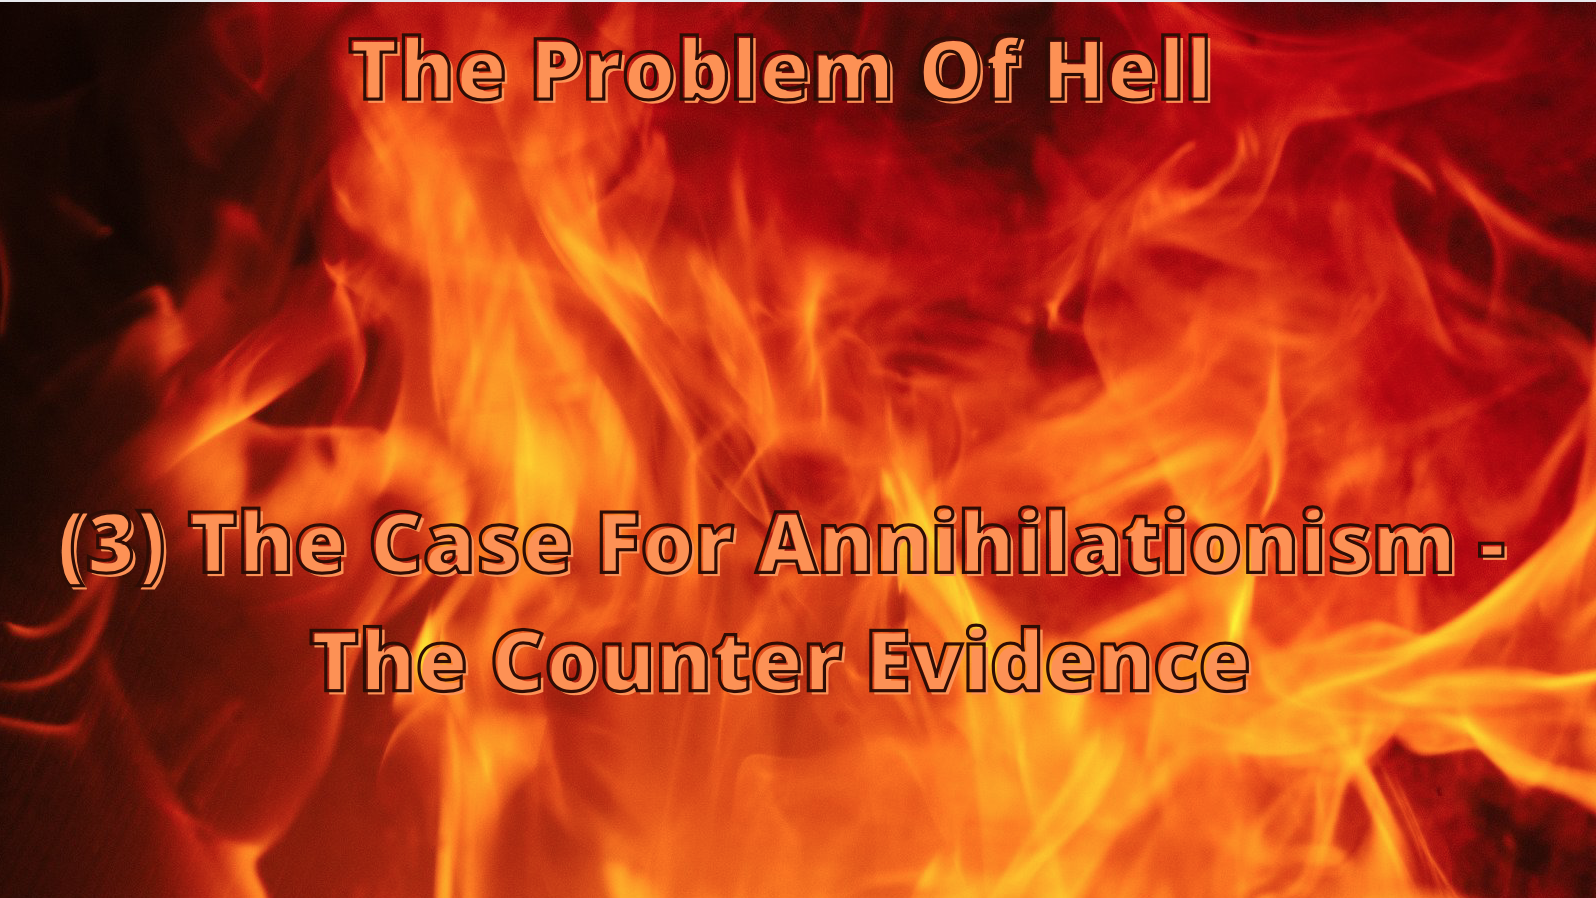 The Problem Of Hell (3) - The Case For Annihilationism: The Counter Evidence